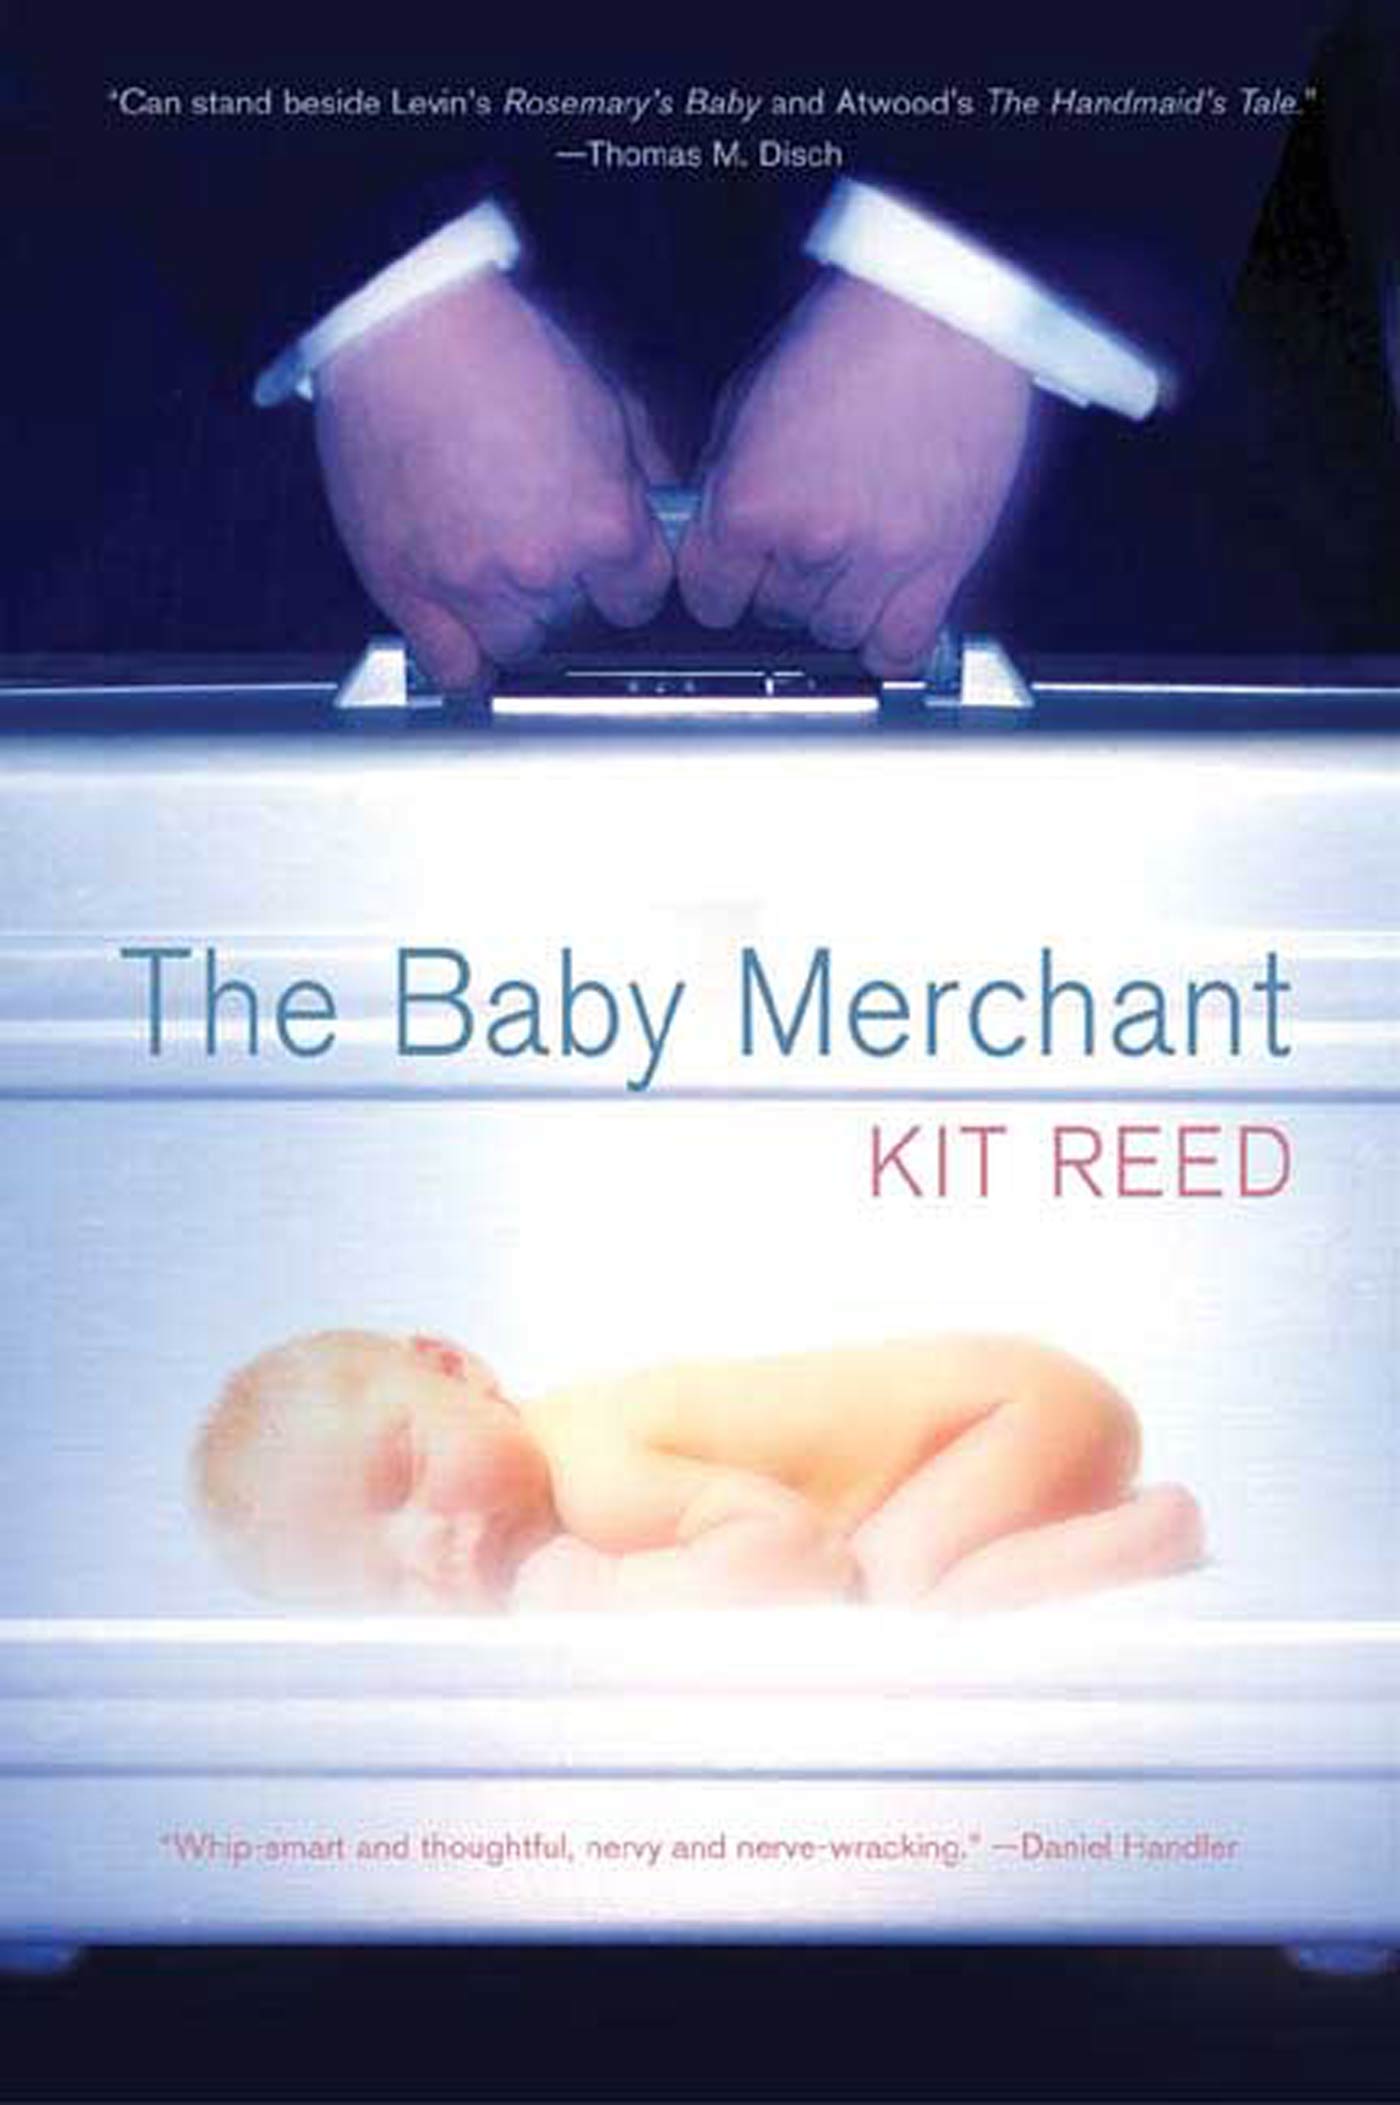 The Baby Merchant by Kit Reed